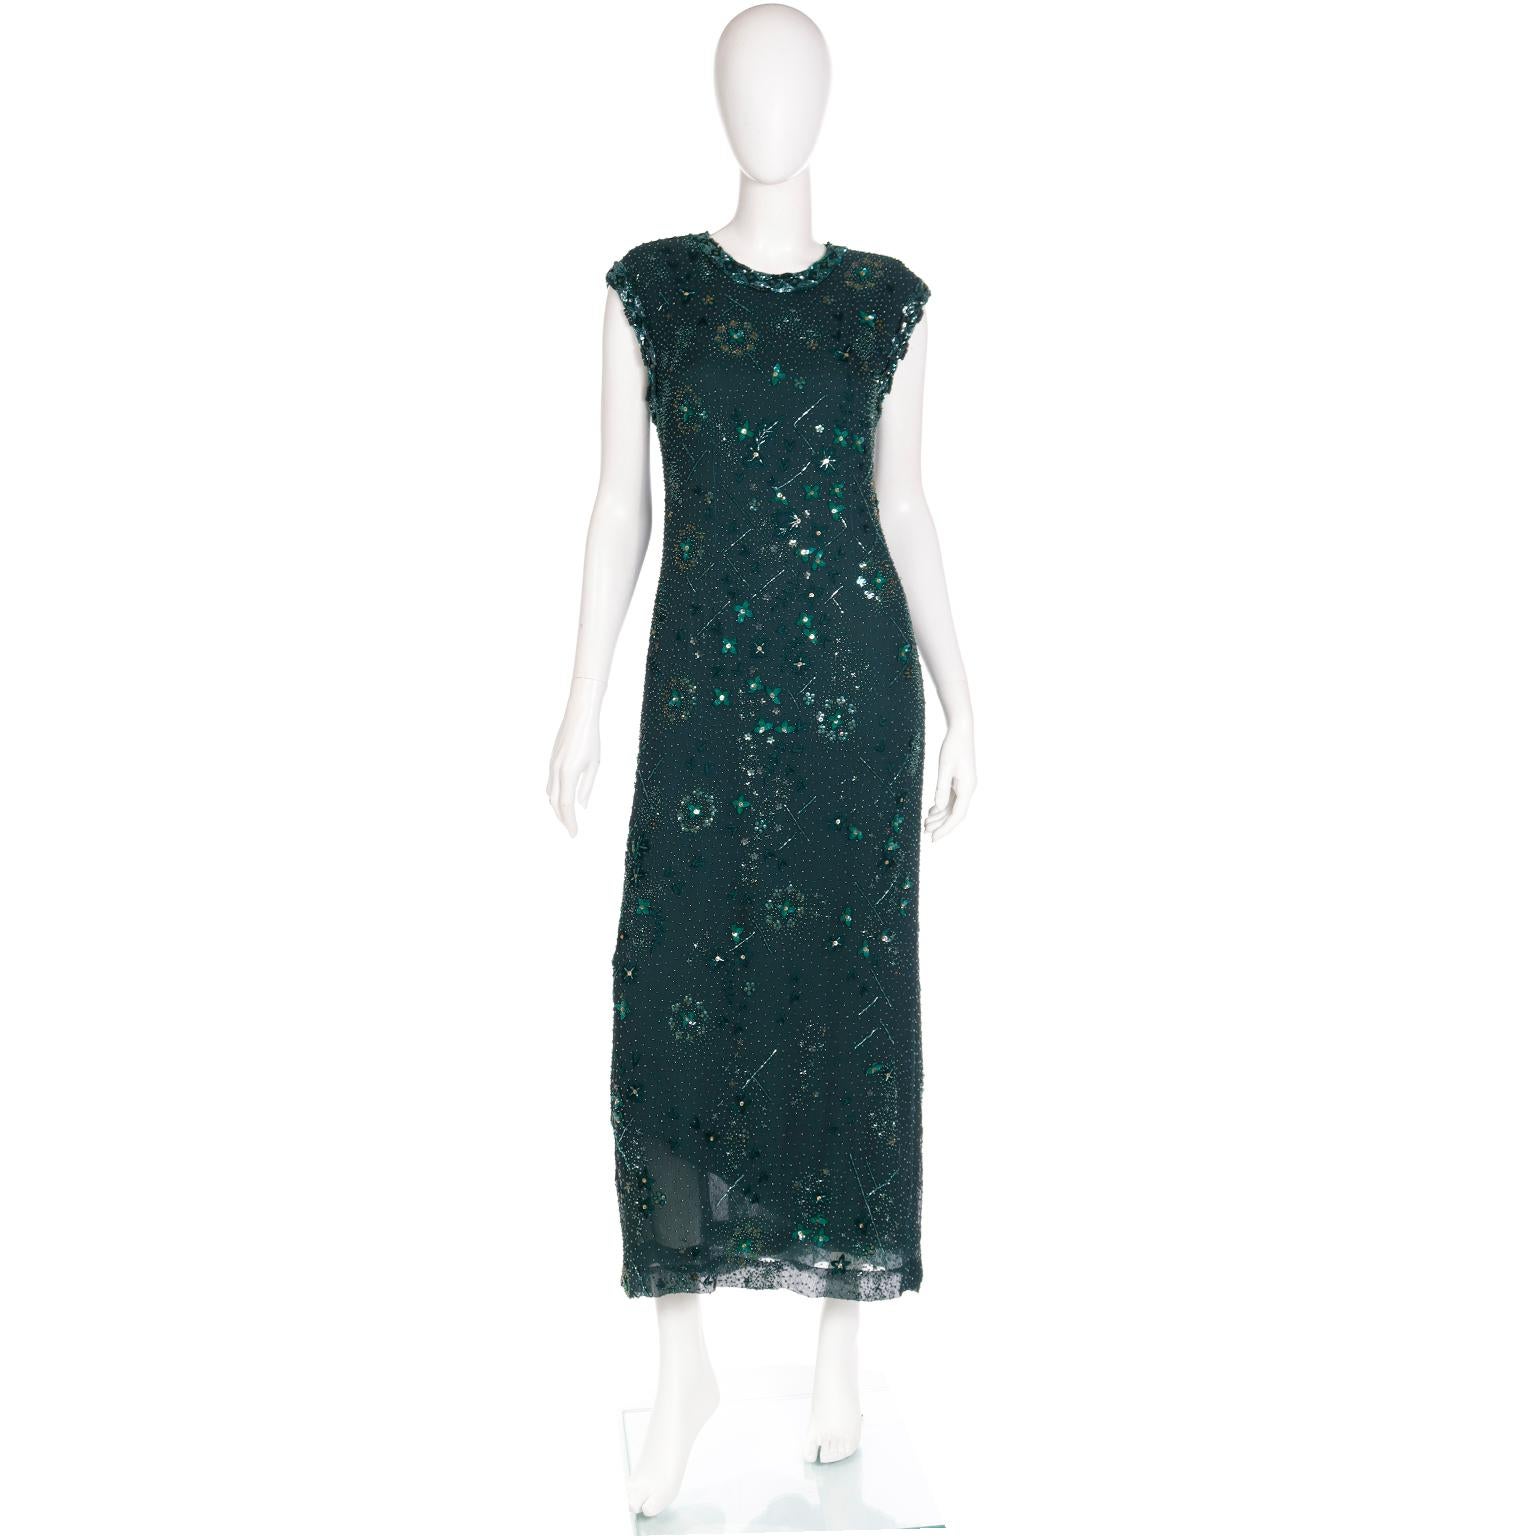 This rich, deep green vintage Richilene evening gown is covered in finely embroidered beads and sparkling sequins and it comes with a matching silk beaded shawl or wrap. This lovely vintage long sheath dress is in a fine silk crepe and is fully